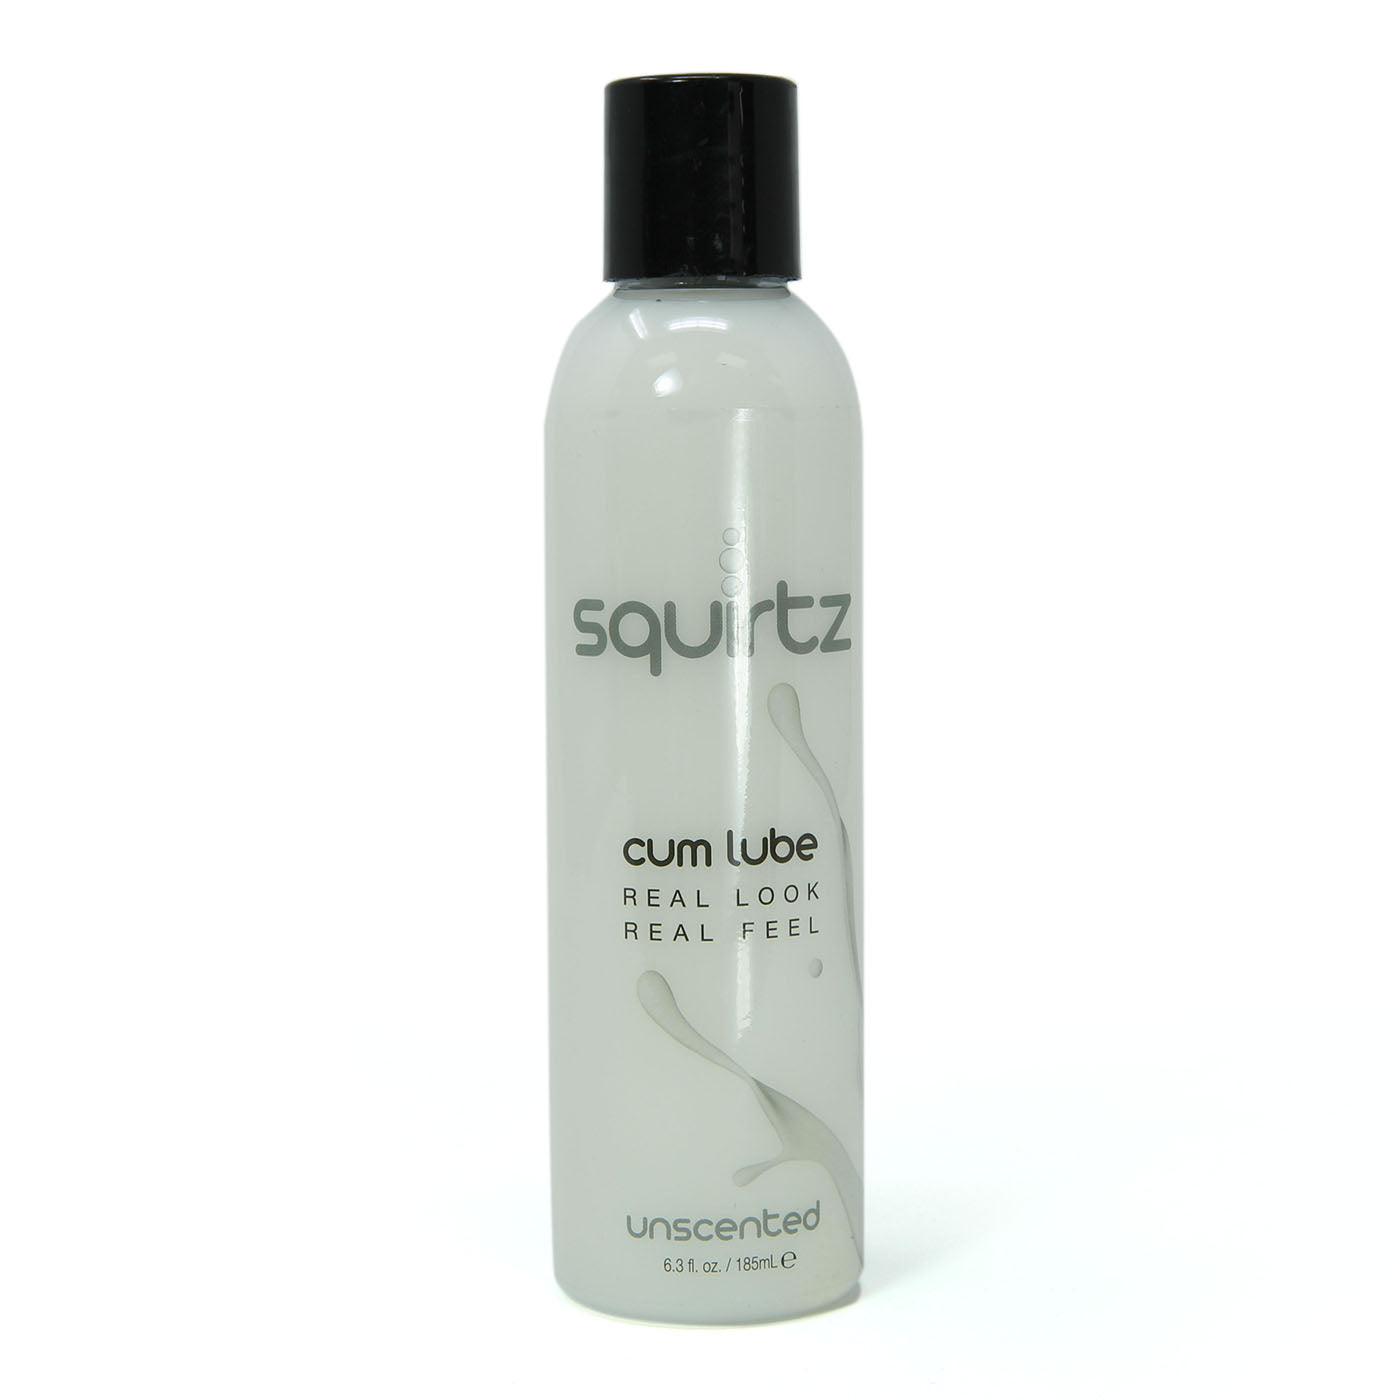 Squirtz Cum Lube Water-based Unscented 6.3 Fl Oz Lubricant